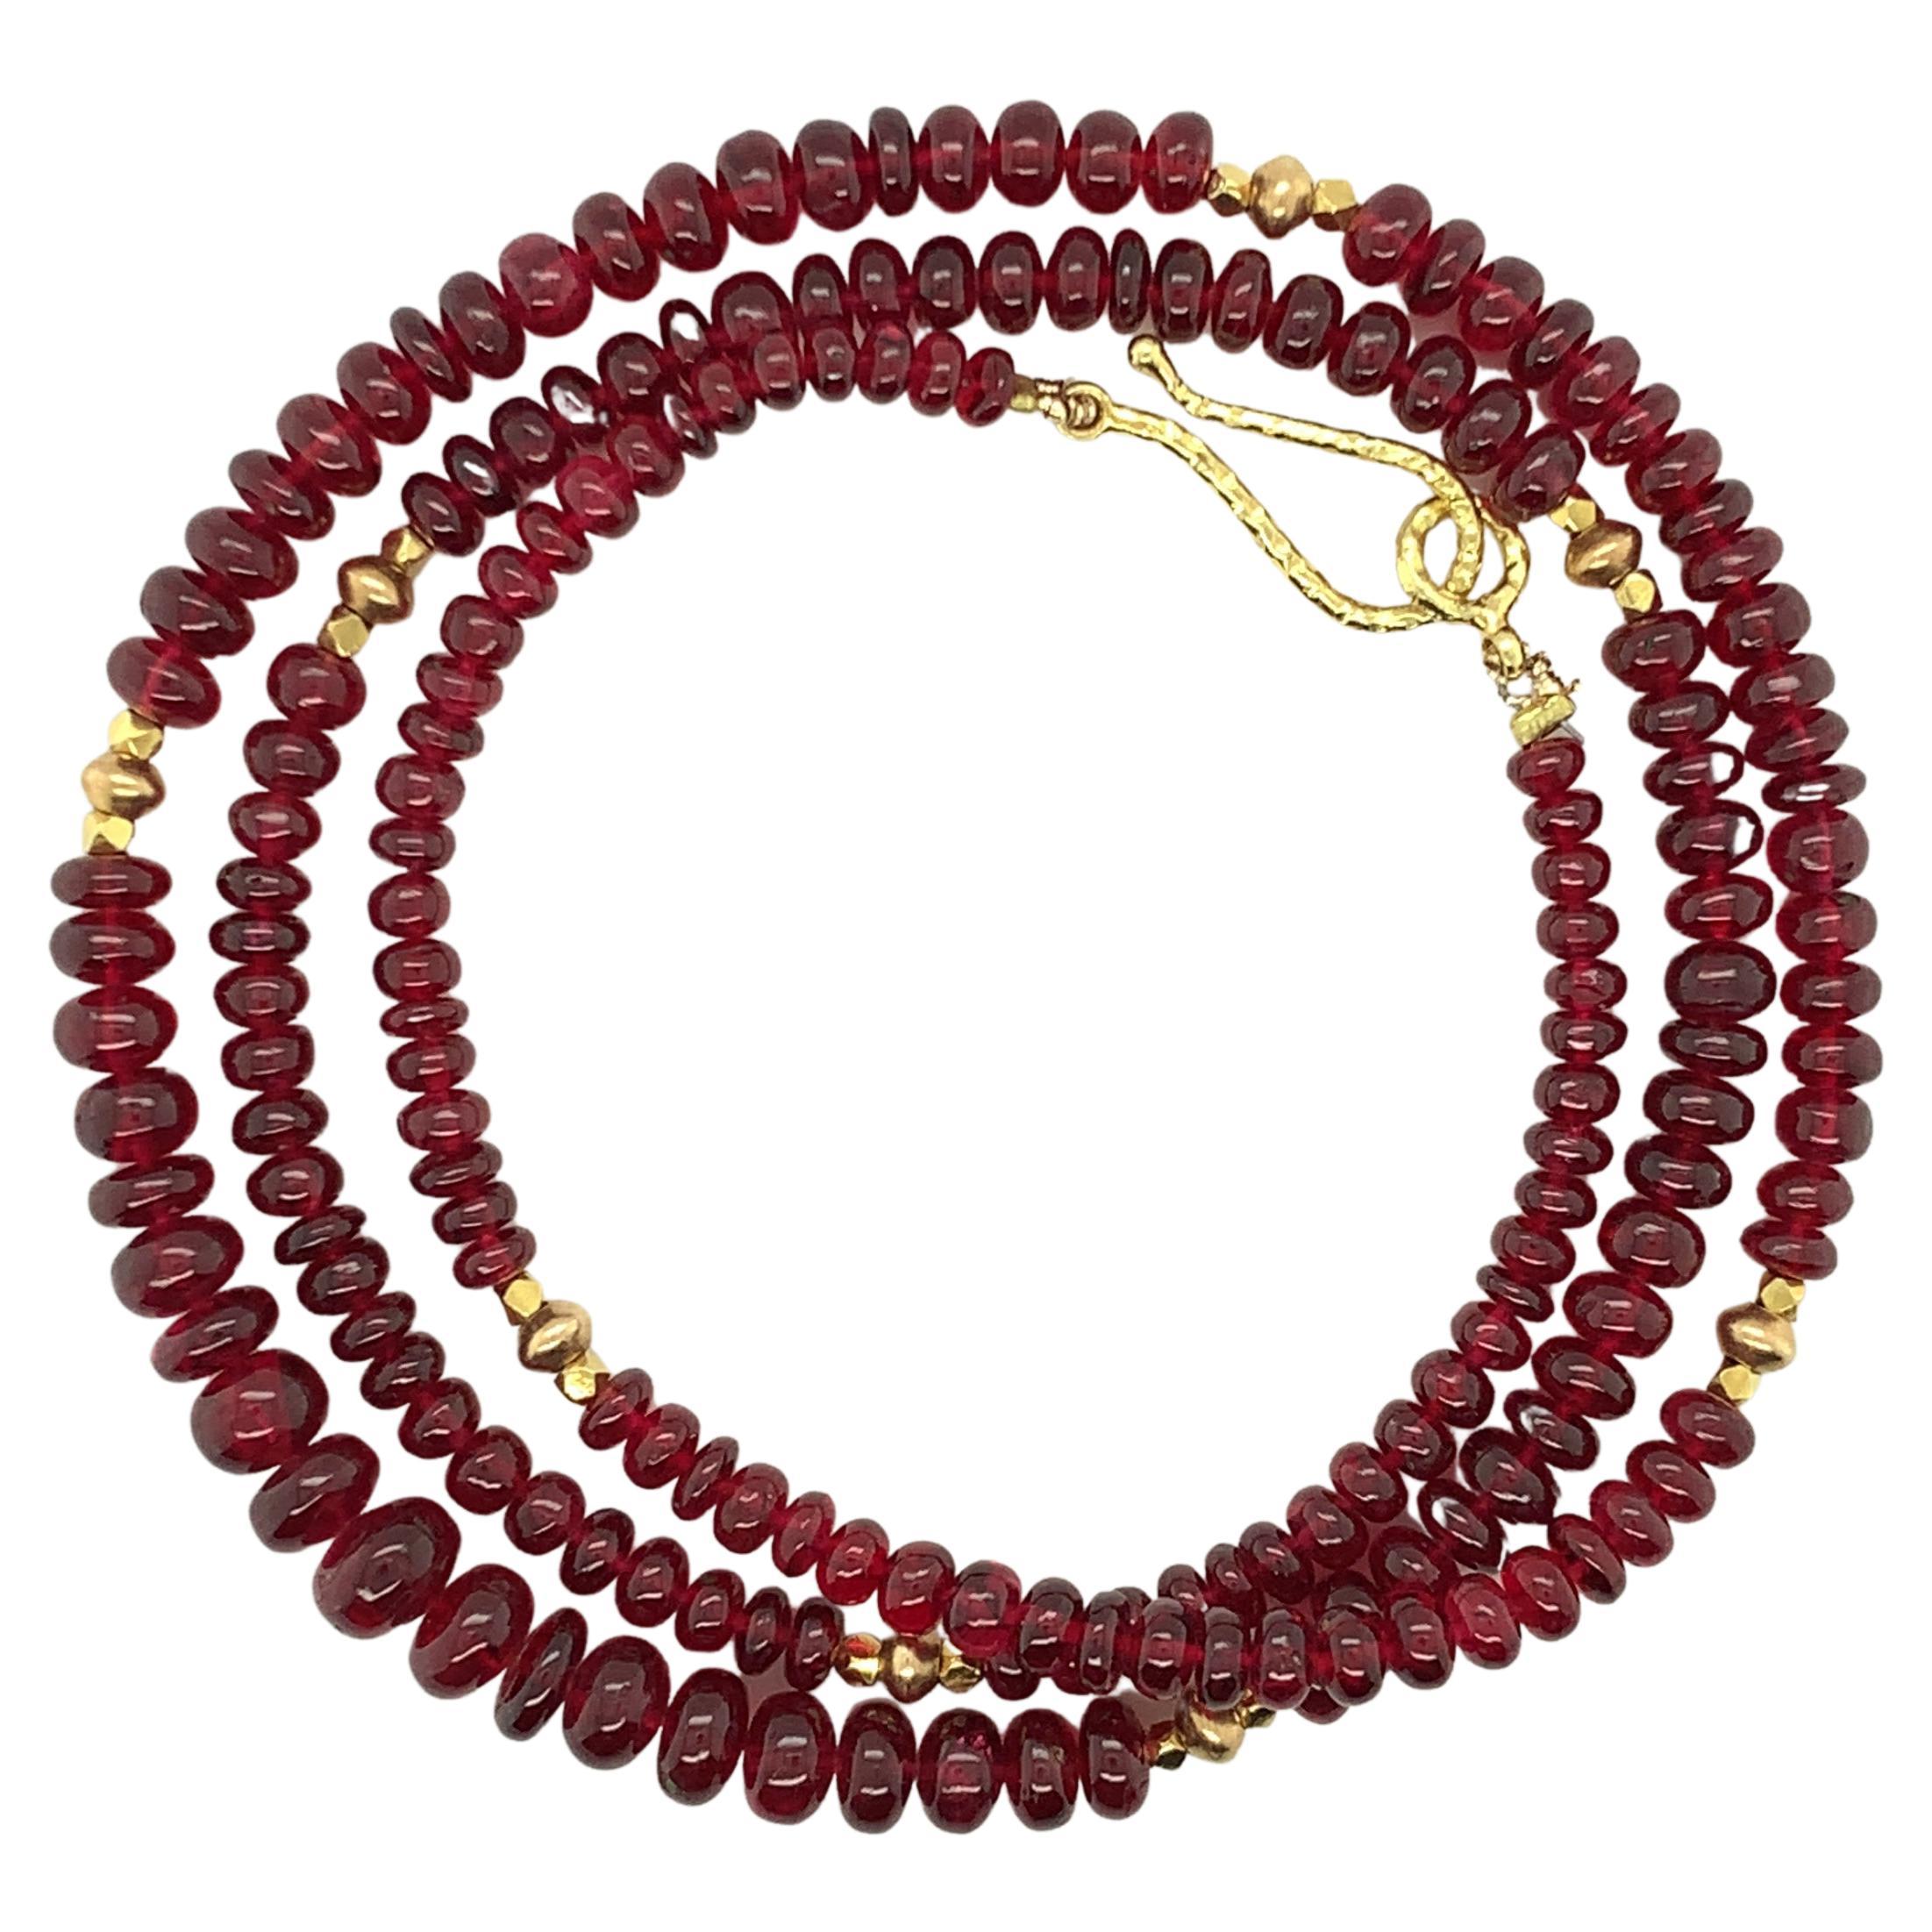 Red Spinel Graduating Bead Necklace with Yellow Gold Spacers, 19 Inches For Sale